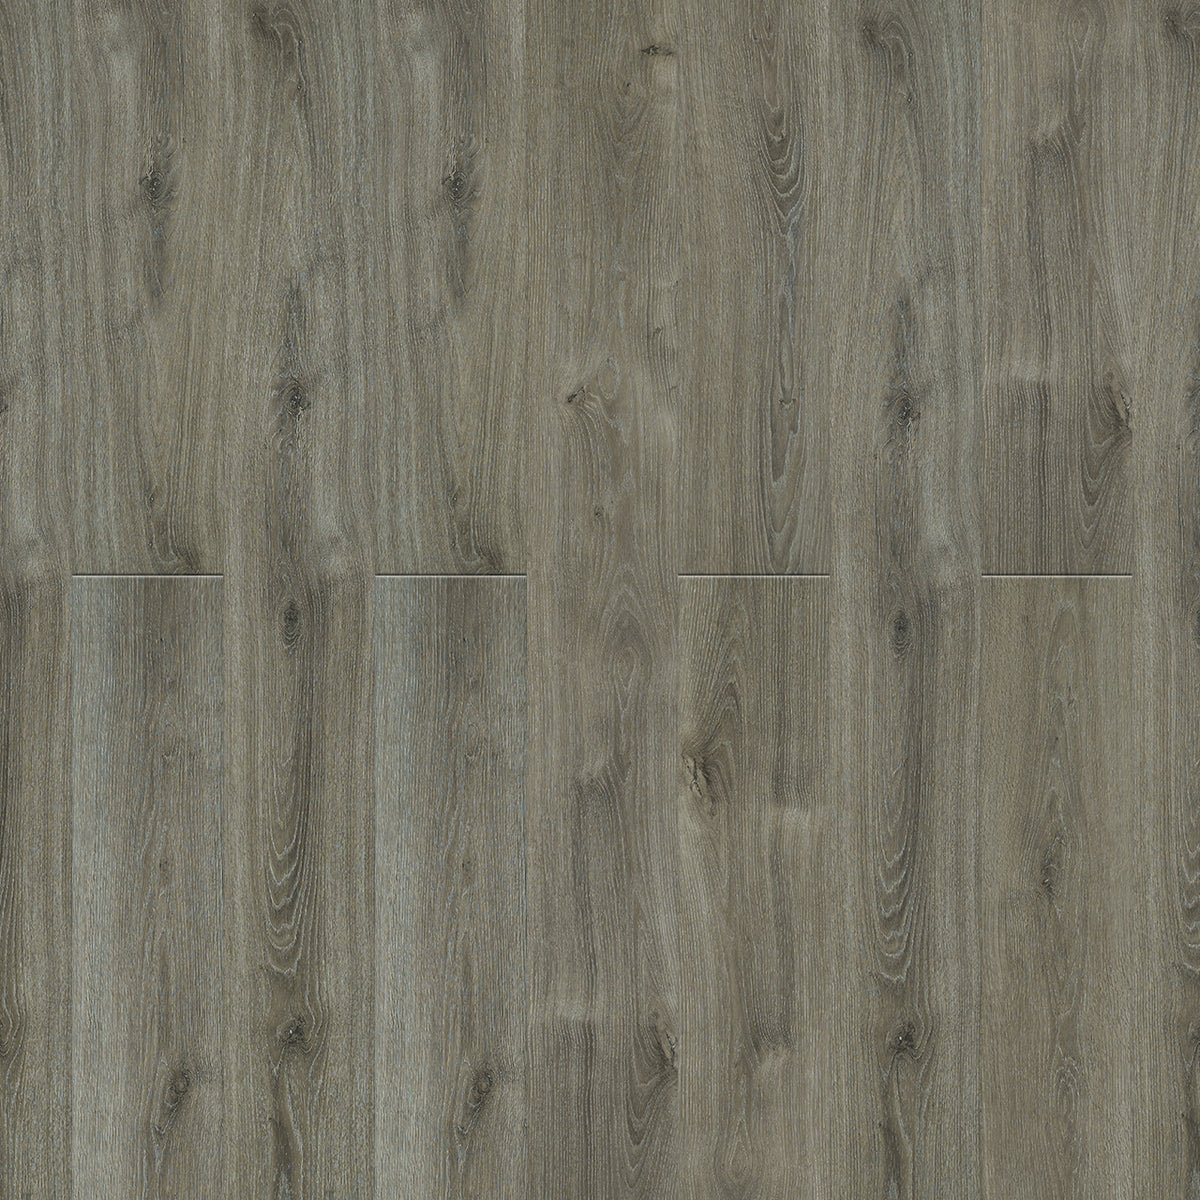 Engineered Floors - Triumph Collection - Bella Sera - 9 in. x 72 in. - Florence